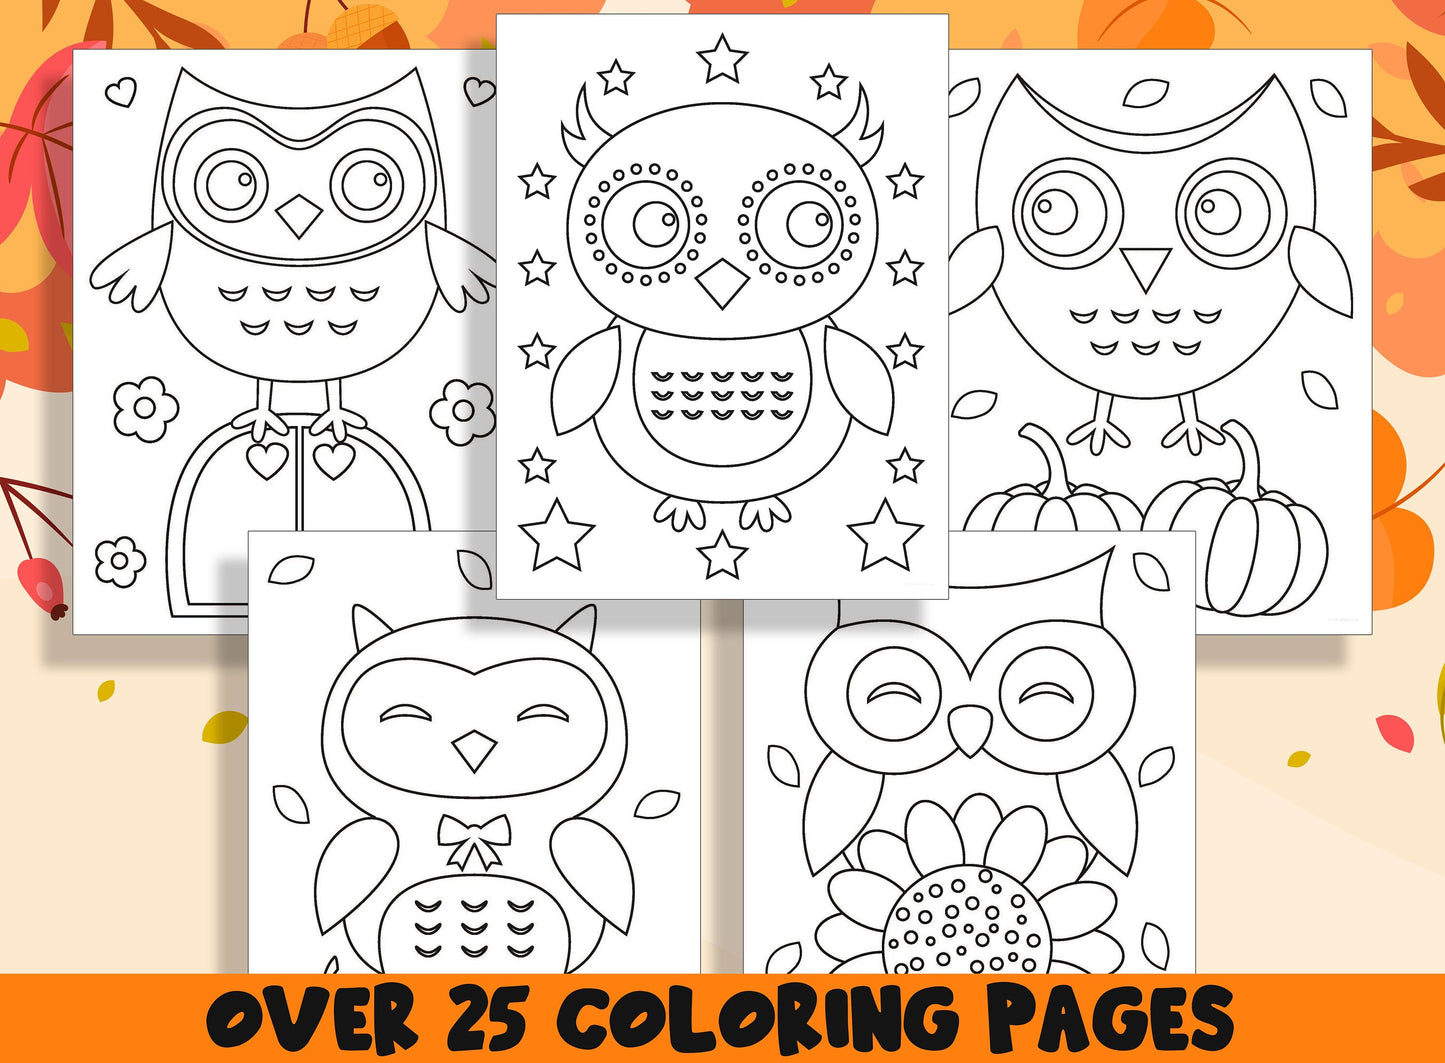 Owl Coloring Book, 25 Printable Owl Coloring Pages for Preschool, Kindergarten, Elementary School Children to Print and Color